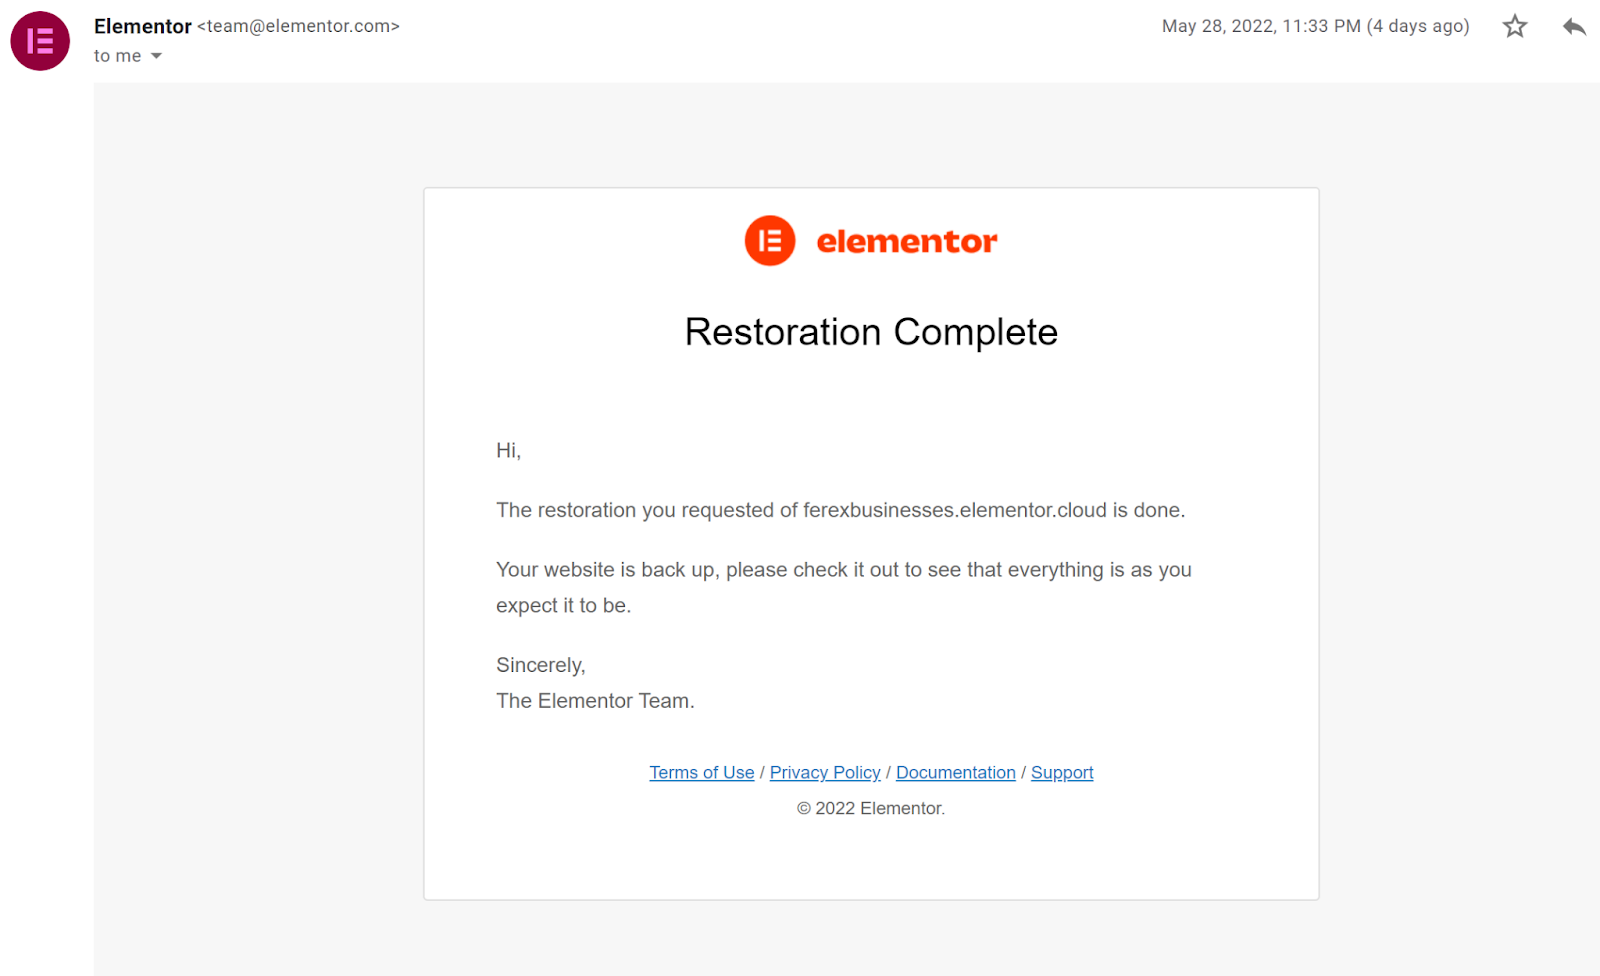 Screenshot of the Elementor confirmation email